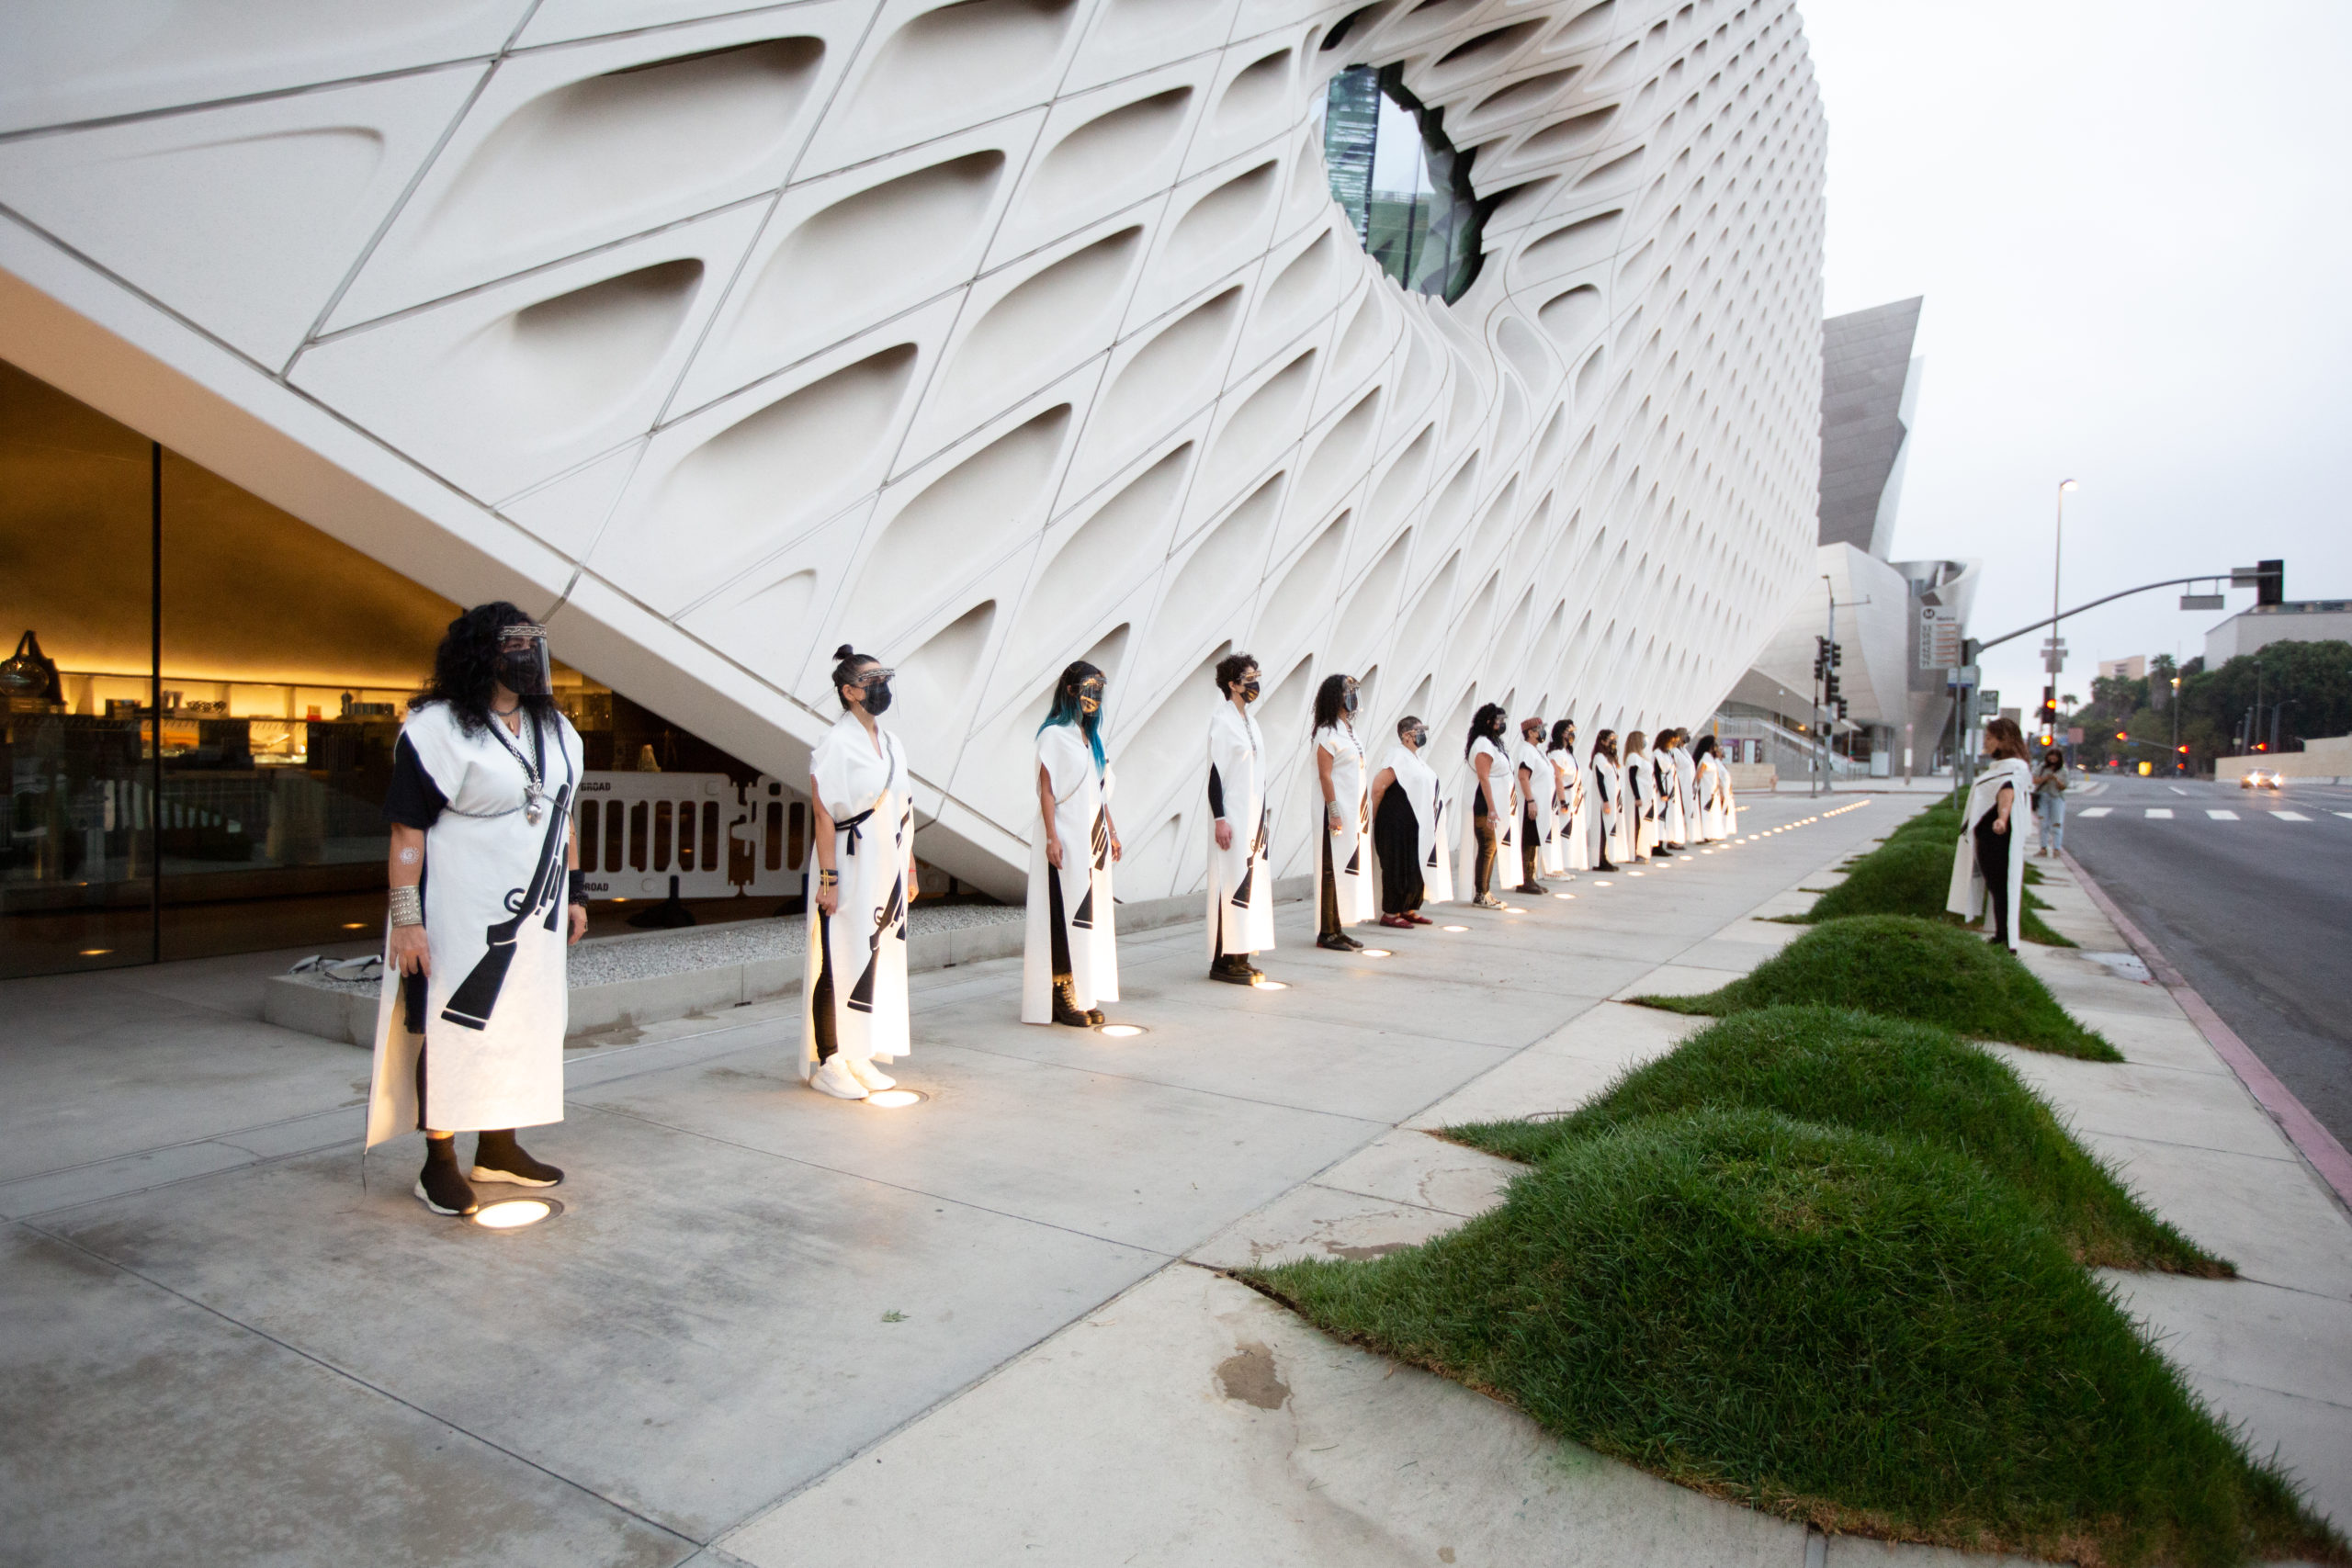 Over a dozen people lined up horizontally outside of a large building, facing one person on the opposite side of them also dressed in white and black.